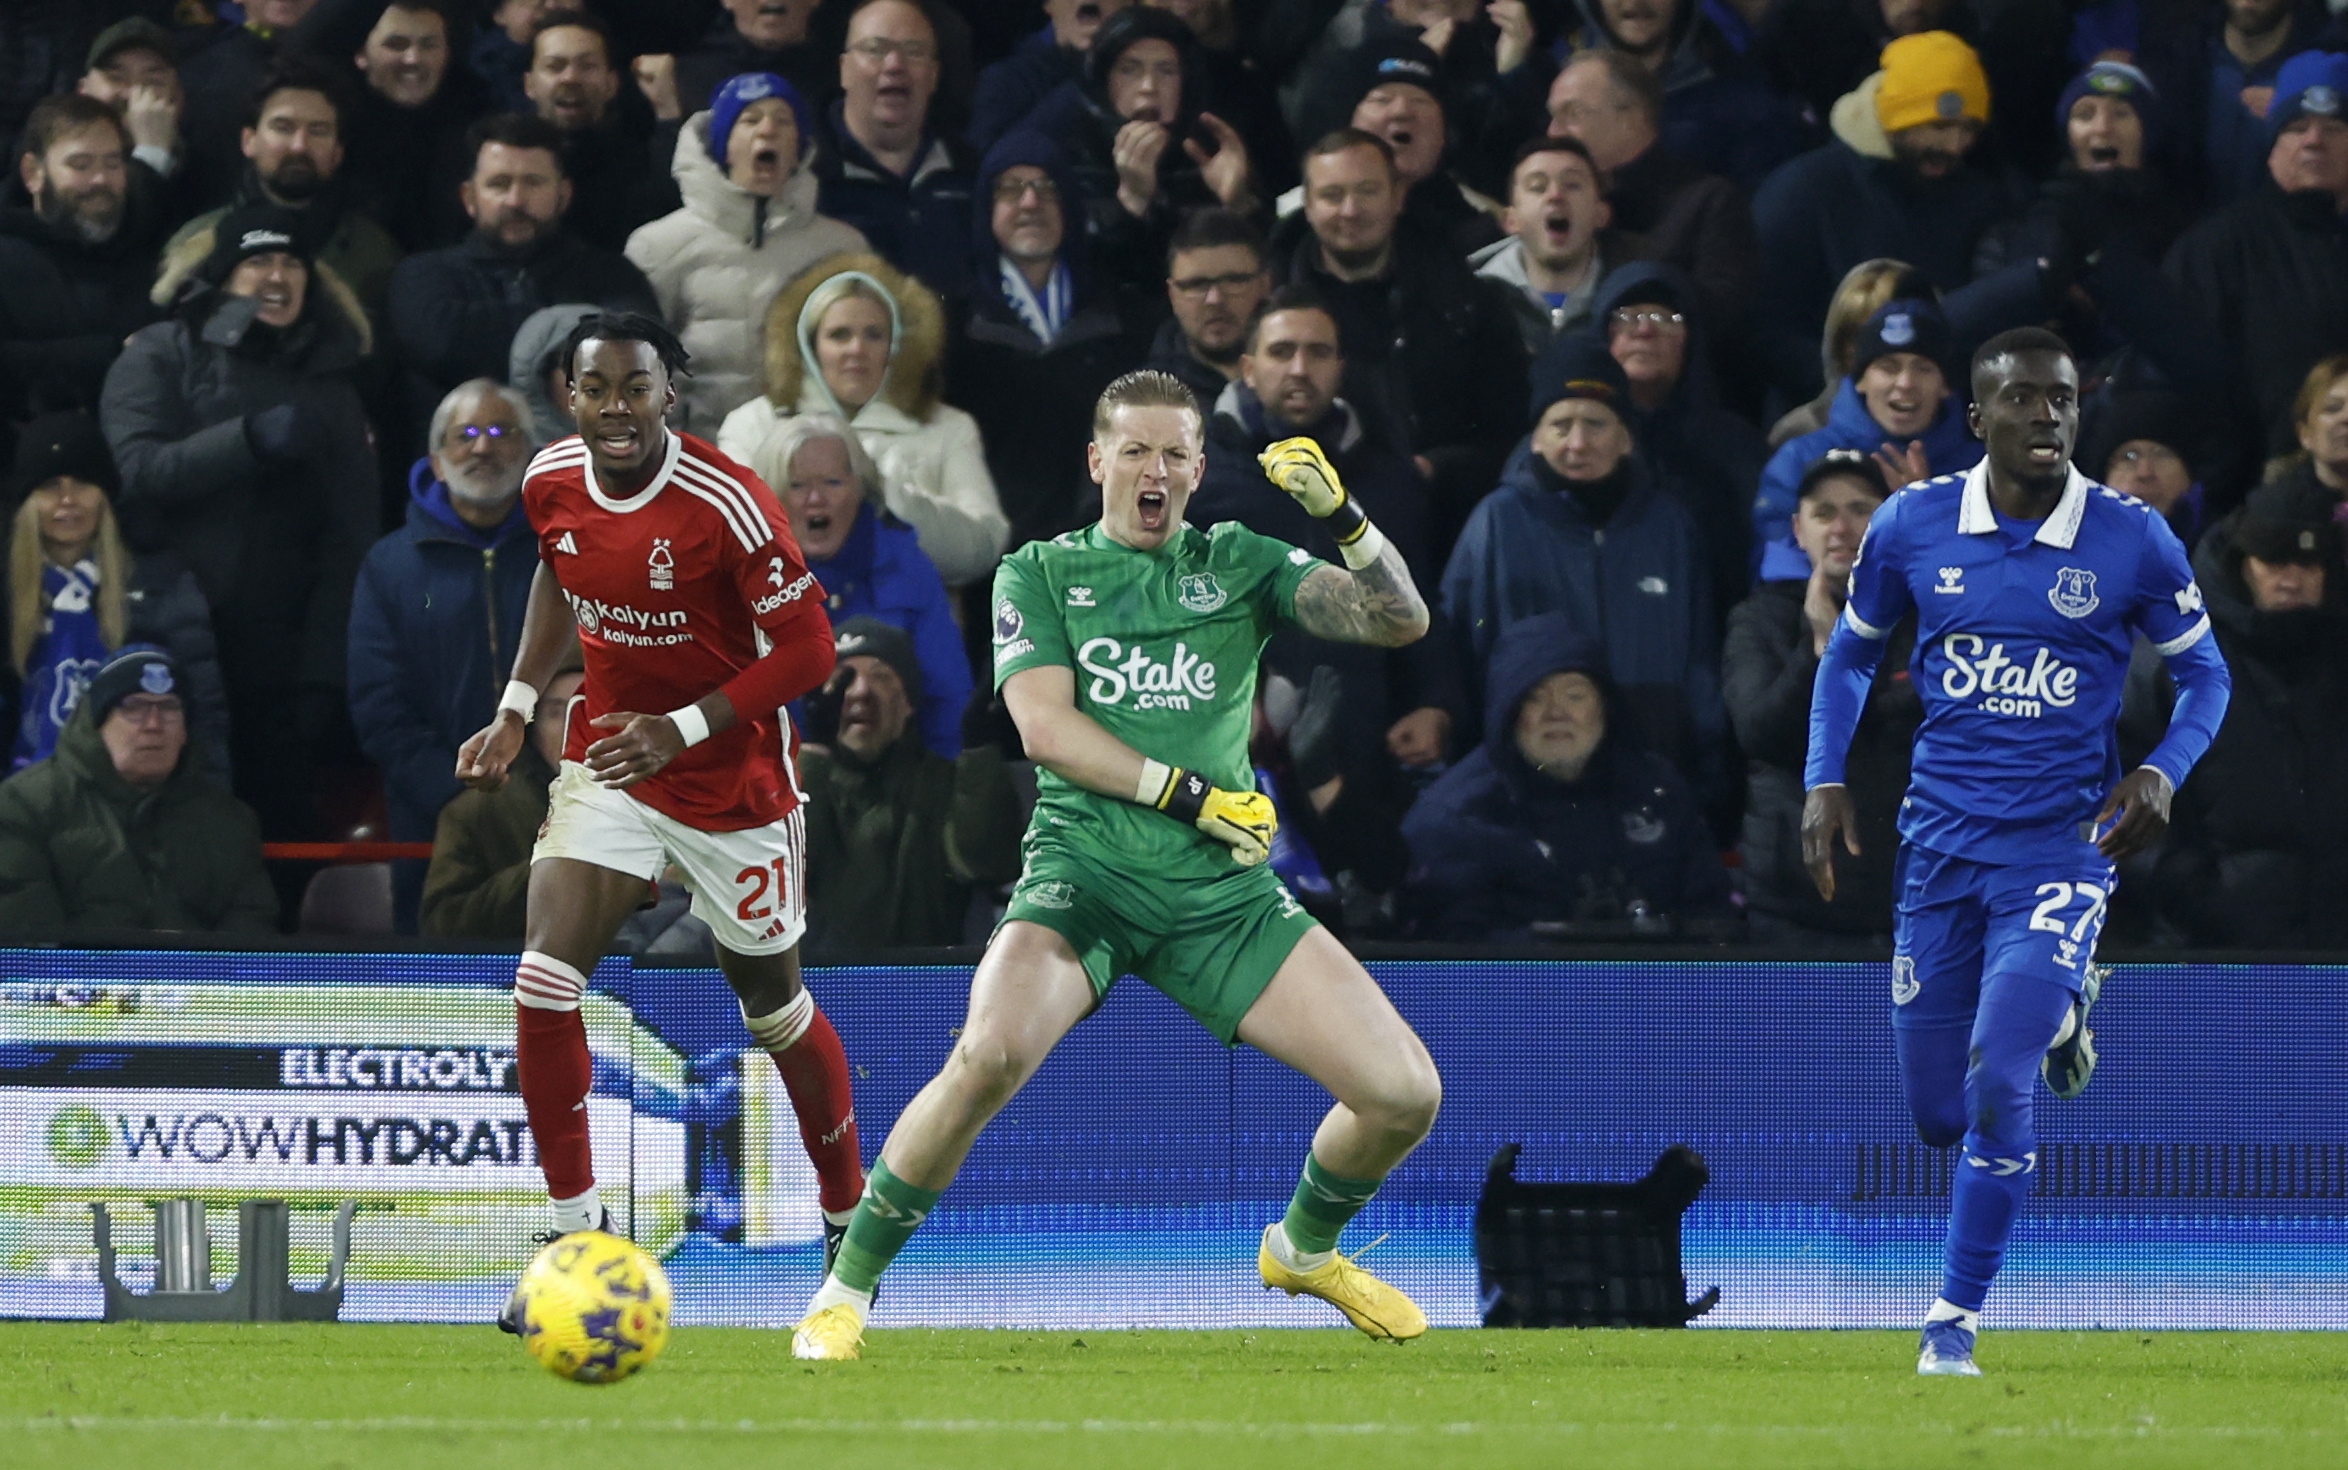 Jordan Pickford, centre, reacts after saving from Anthony Elanga, left